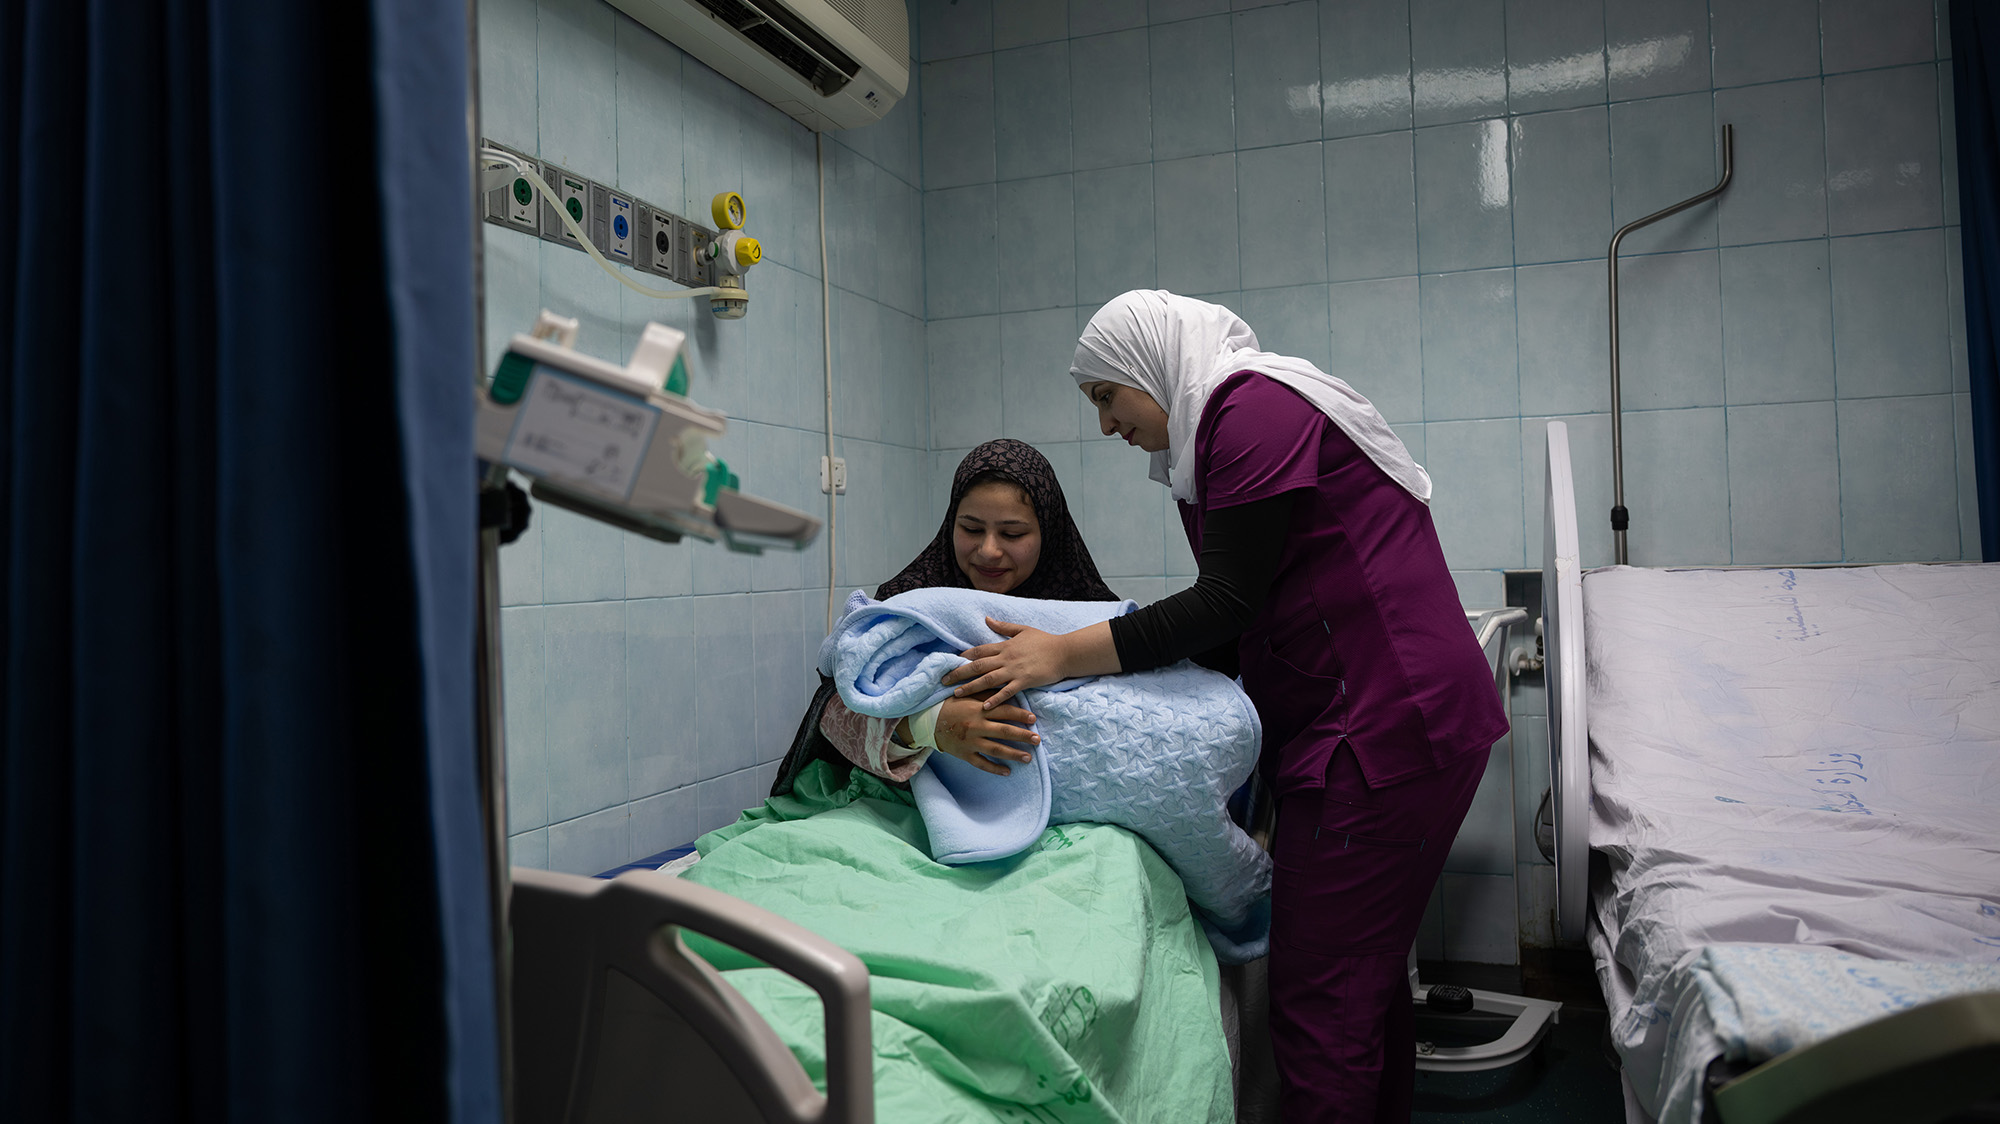 Woman sitting in hospital bed holds her newborn. A midwife stands over her.